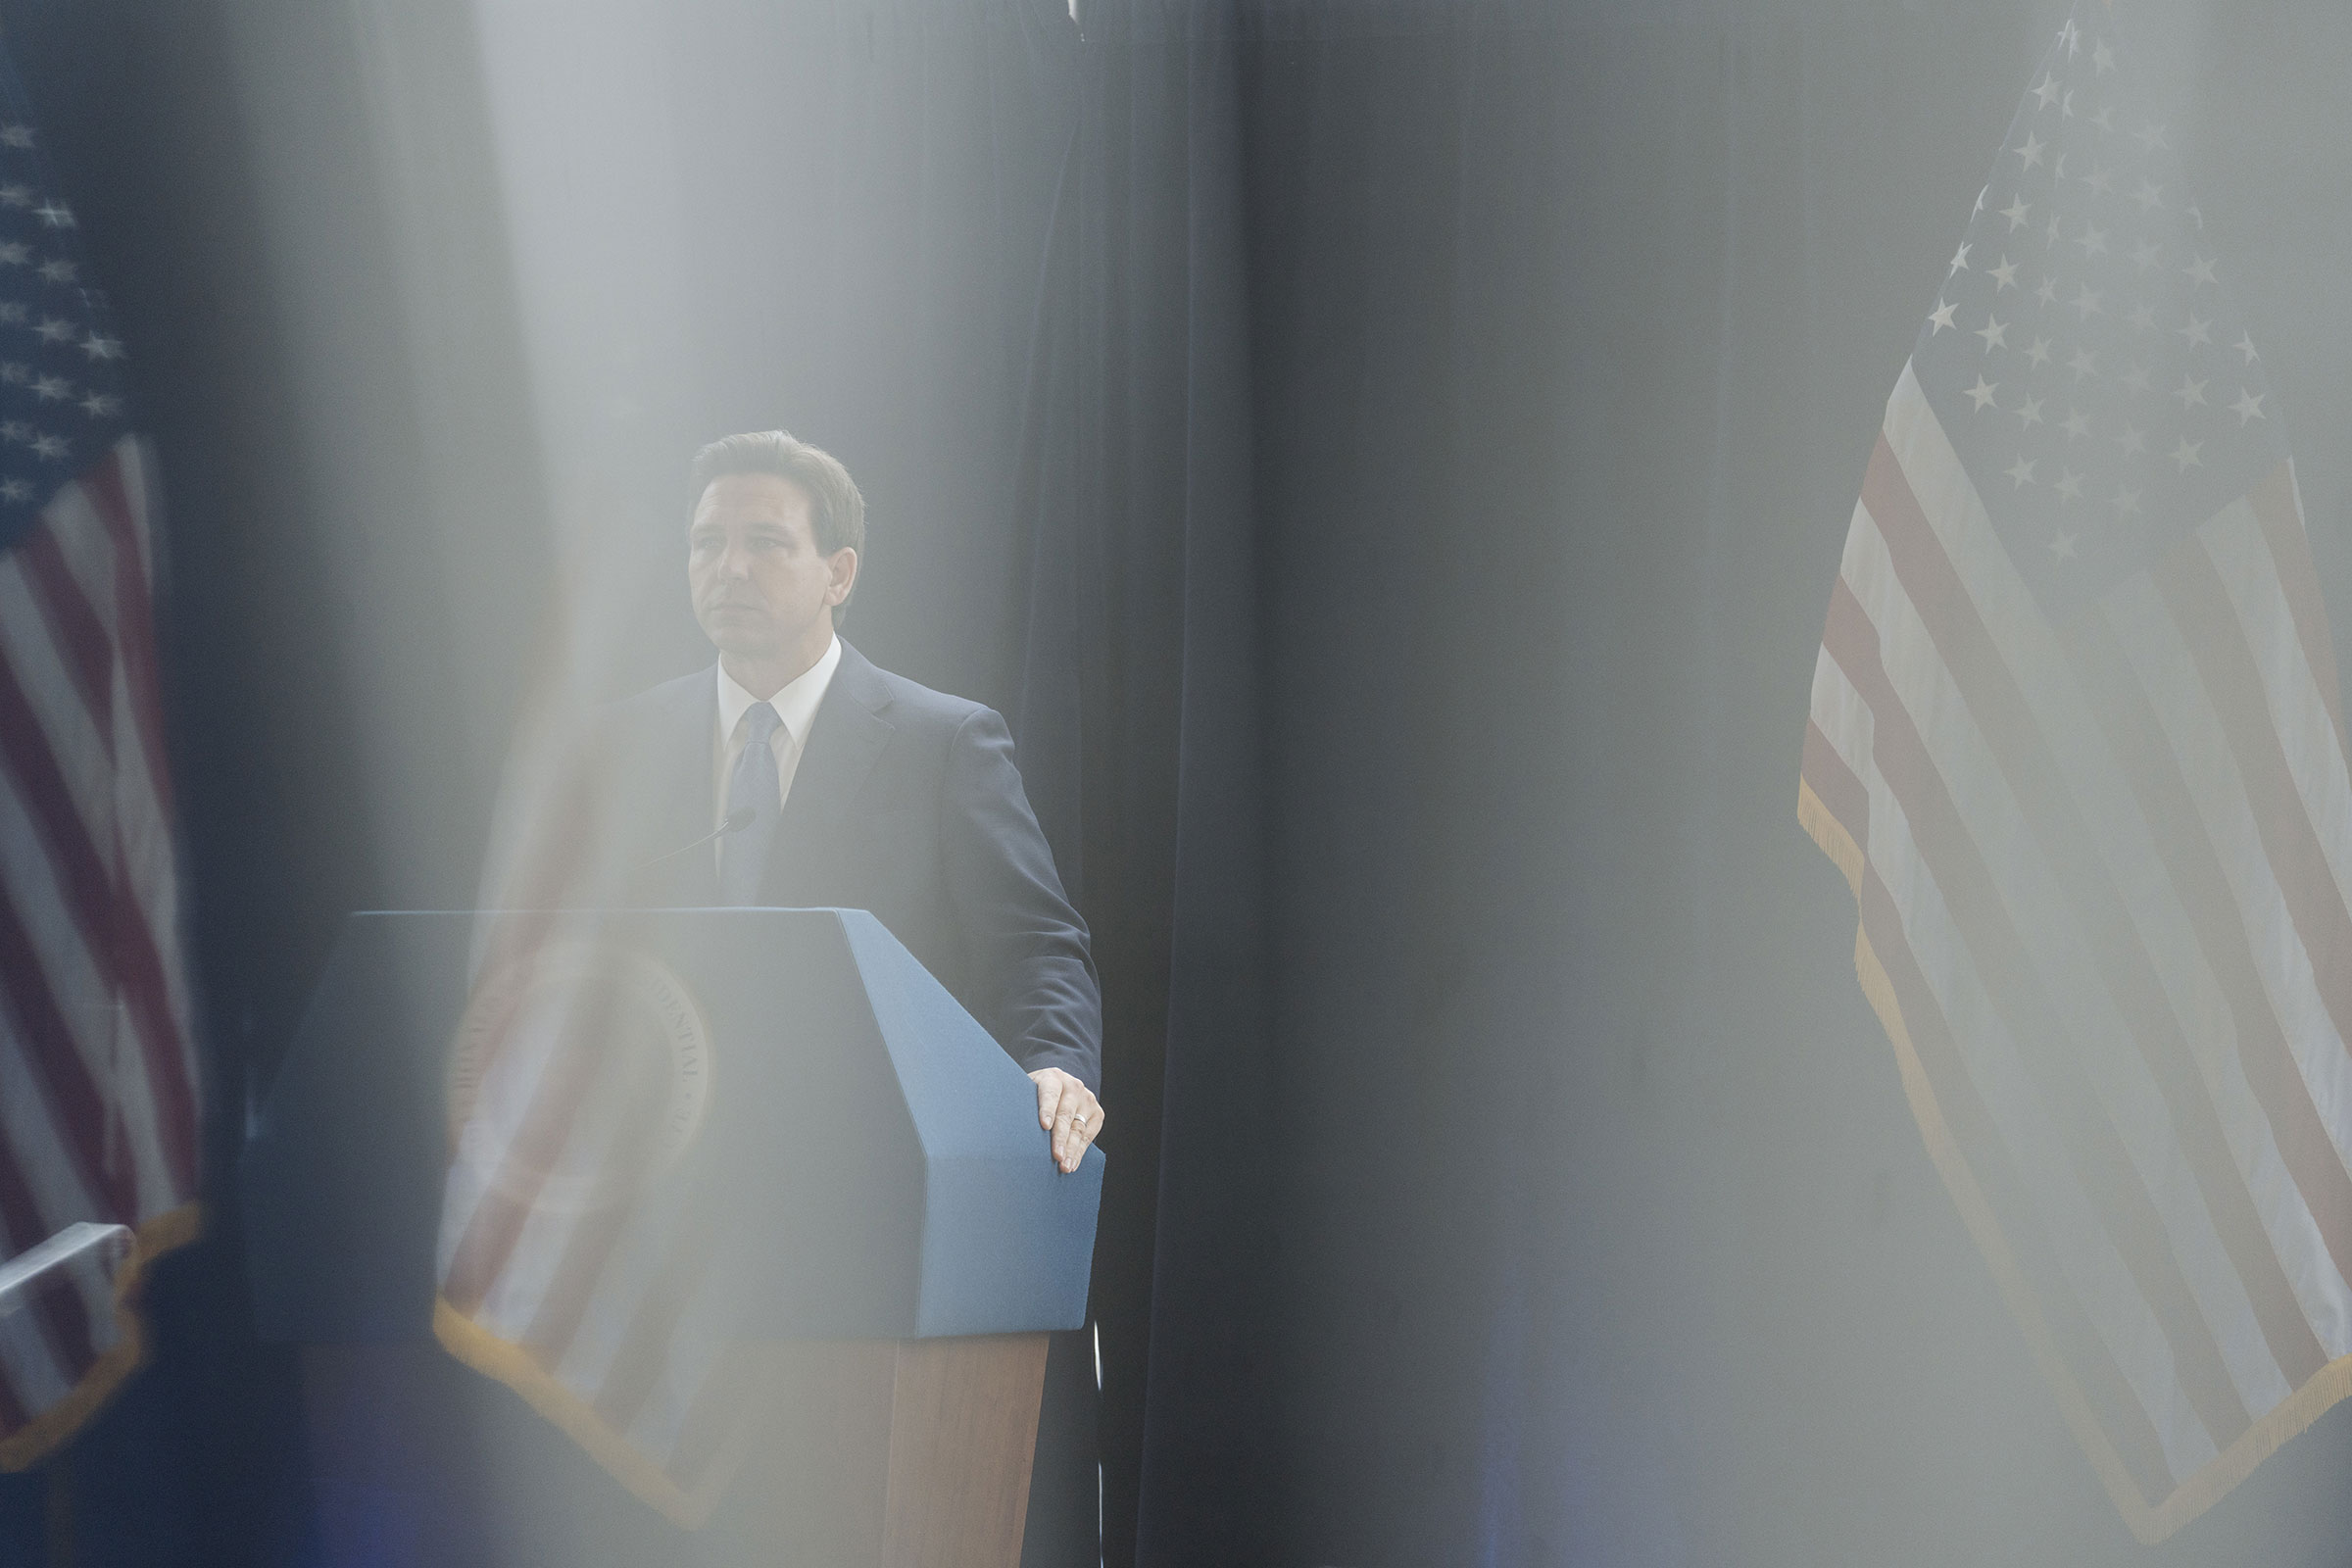 DeSantis speaks during his 'The Courage to Be Free' book tour in Simi Valley, Calif., on March, 5